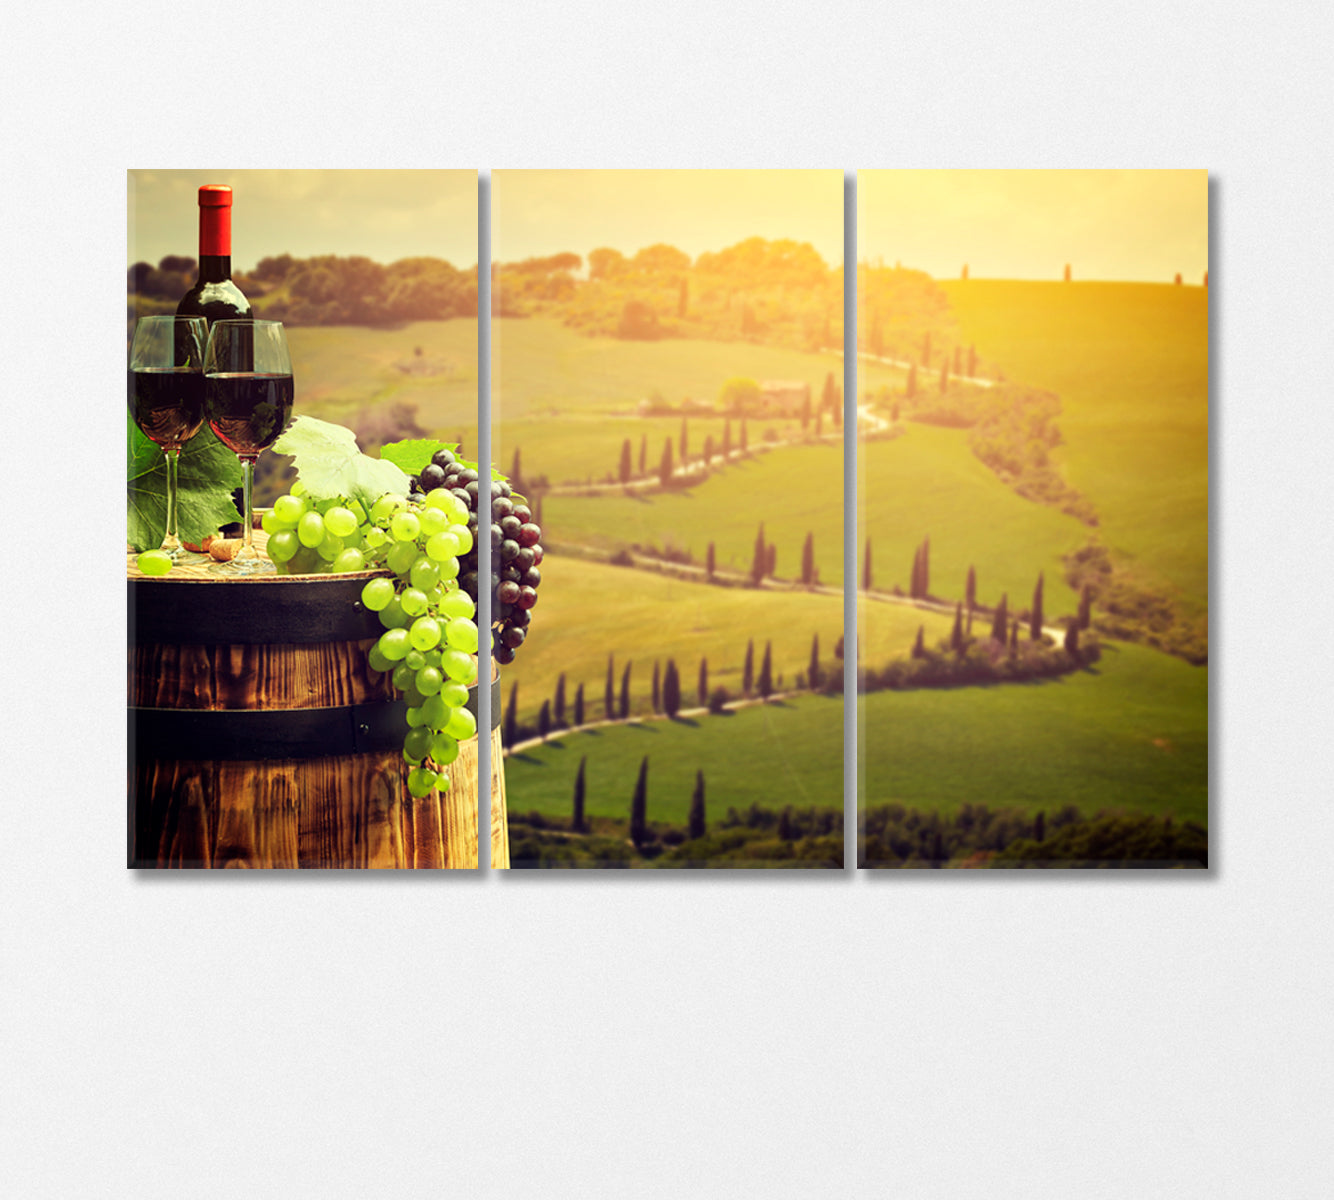 Red Wine with Barrel on Vineyard in Tuscany Italy Canvas Print-Canvas Print-CetArt-3 Panels-36x24 inches-CetArt